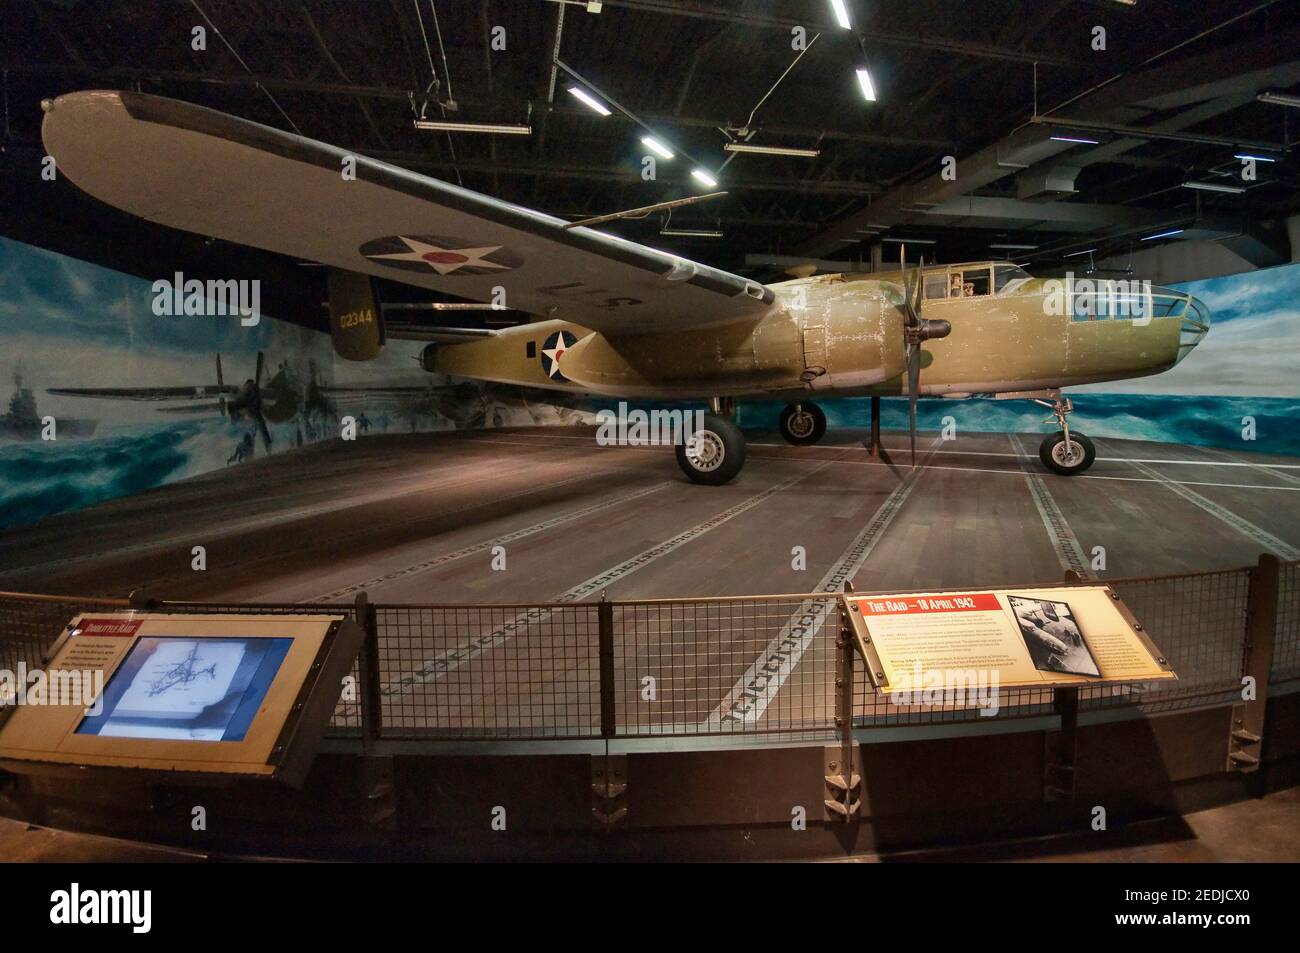 North American B-25 Mitchell, an American twin-engined medium bomber, famous for Doolittle Raid, diorama display at George H W Bush Gallery at National Museum of the Pacific War in Fredericksburg, Texas, USA Stock Photo